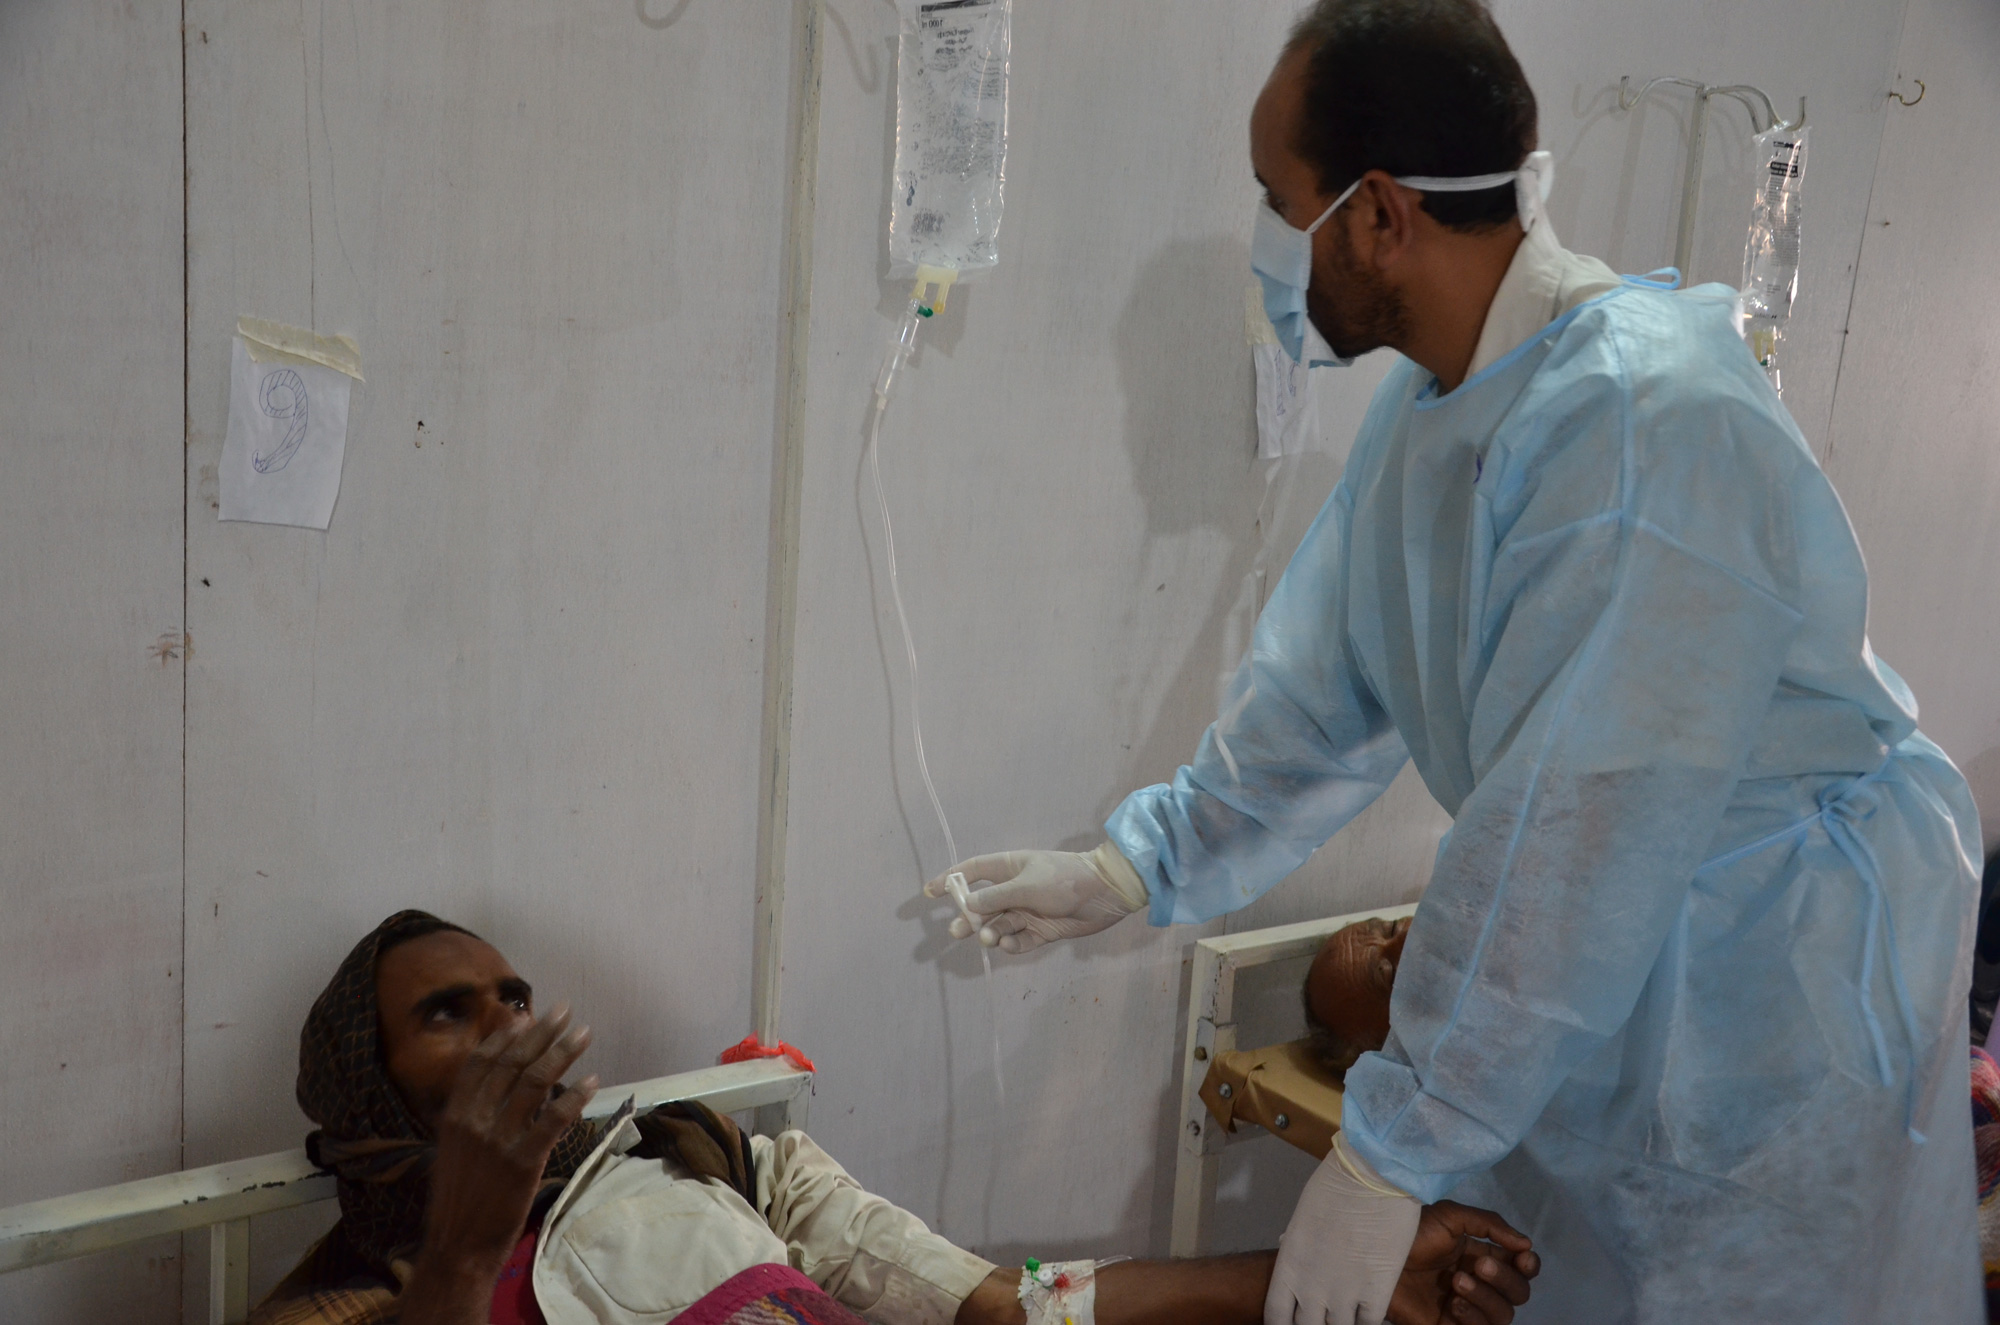 The Khamer MSF cholera treatment centre has alone treated more than 1,200 patients in less than two weeks during May.